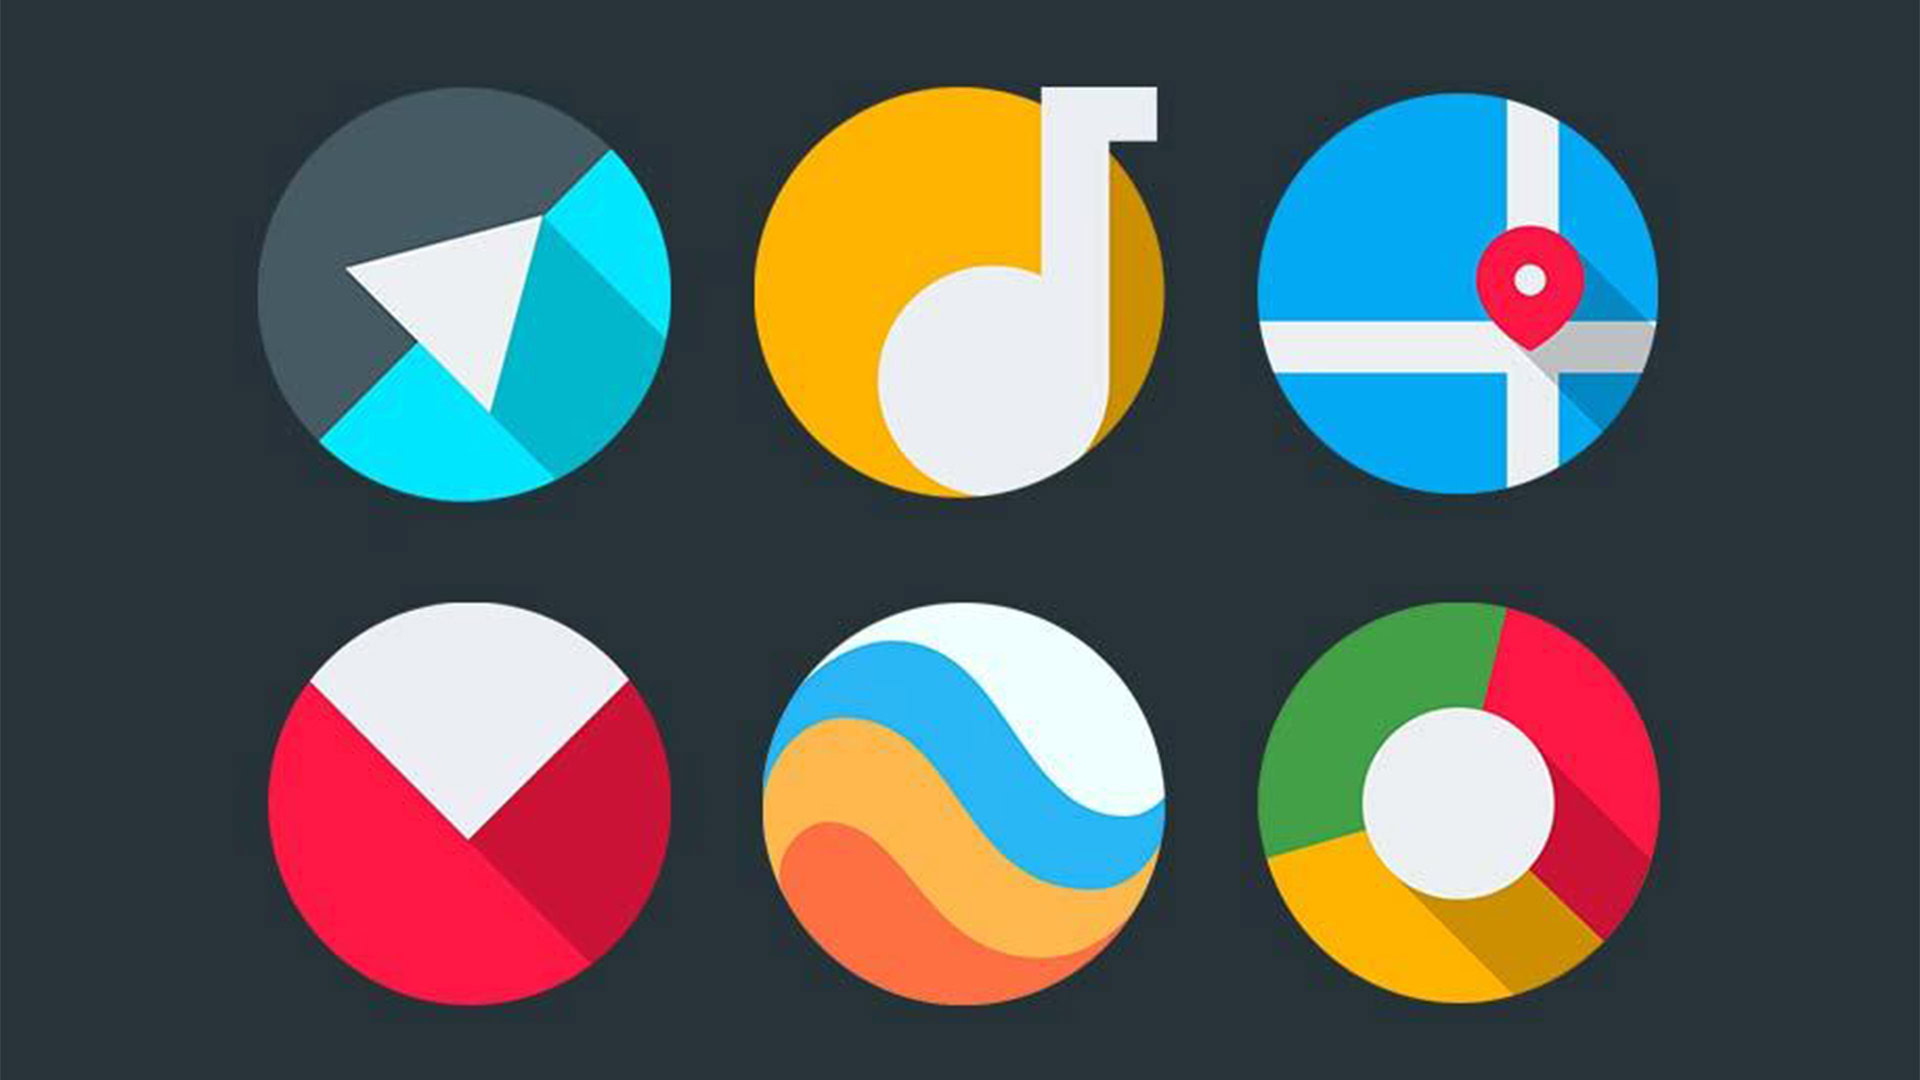 android icon packs